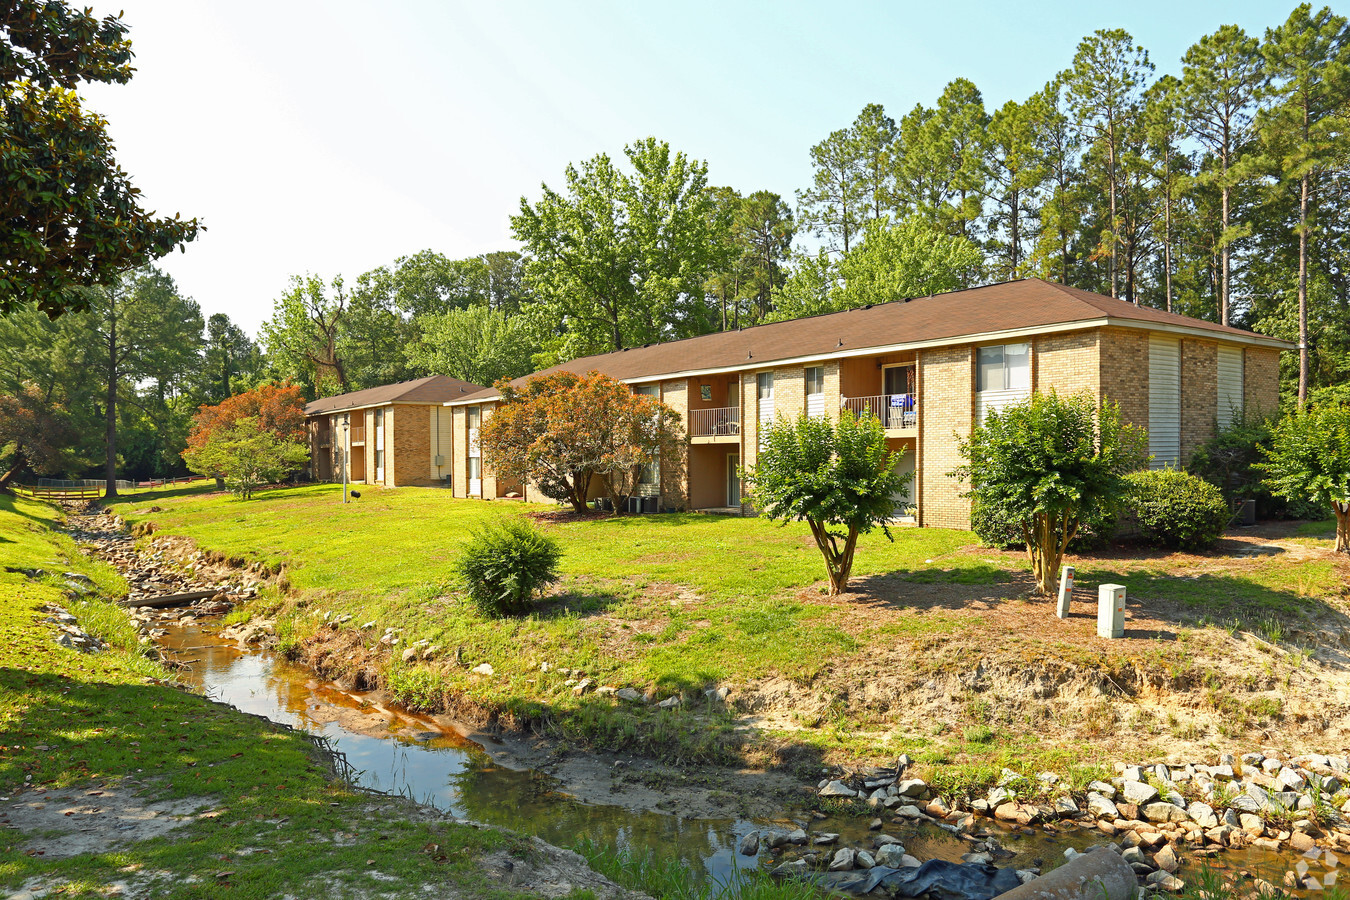 Tanglewood Apartments Located in Columbia, South Carolina our charming apartment community